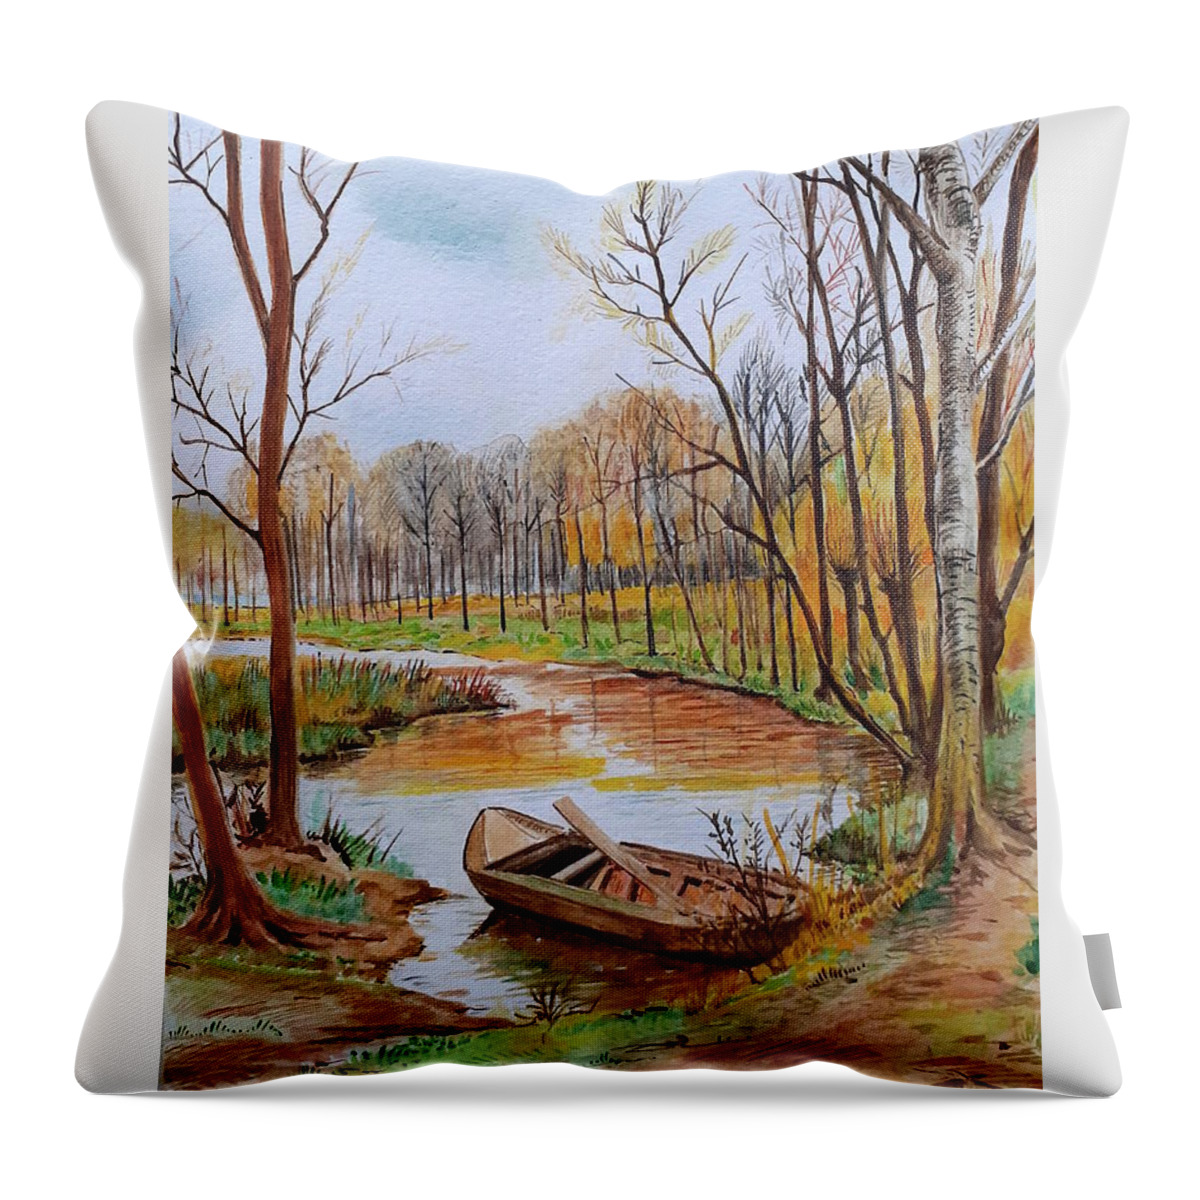 Landscape Throw Pillow featuring the drawing Autumn landscape by Carolina Prieto Moreno